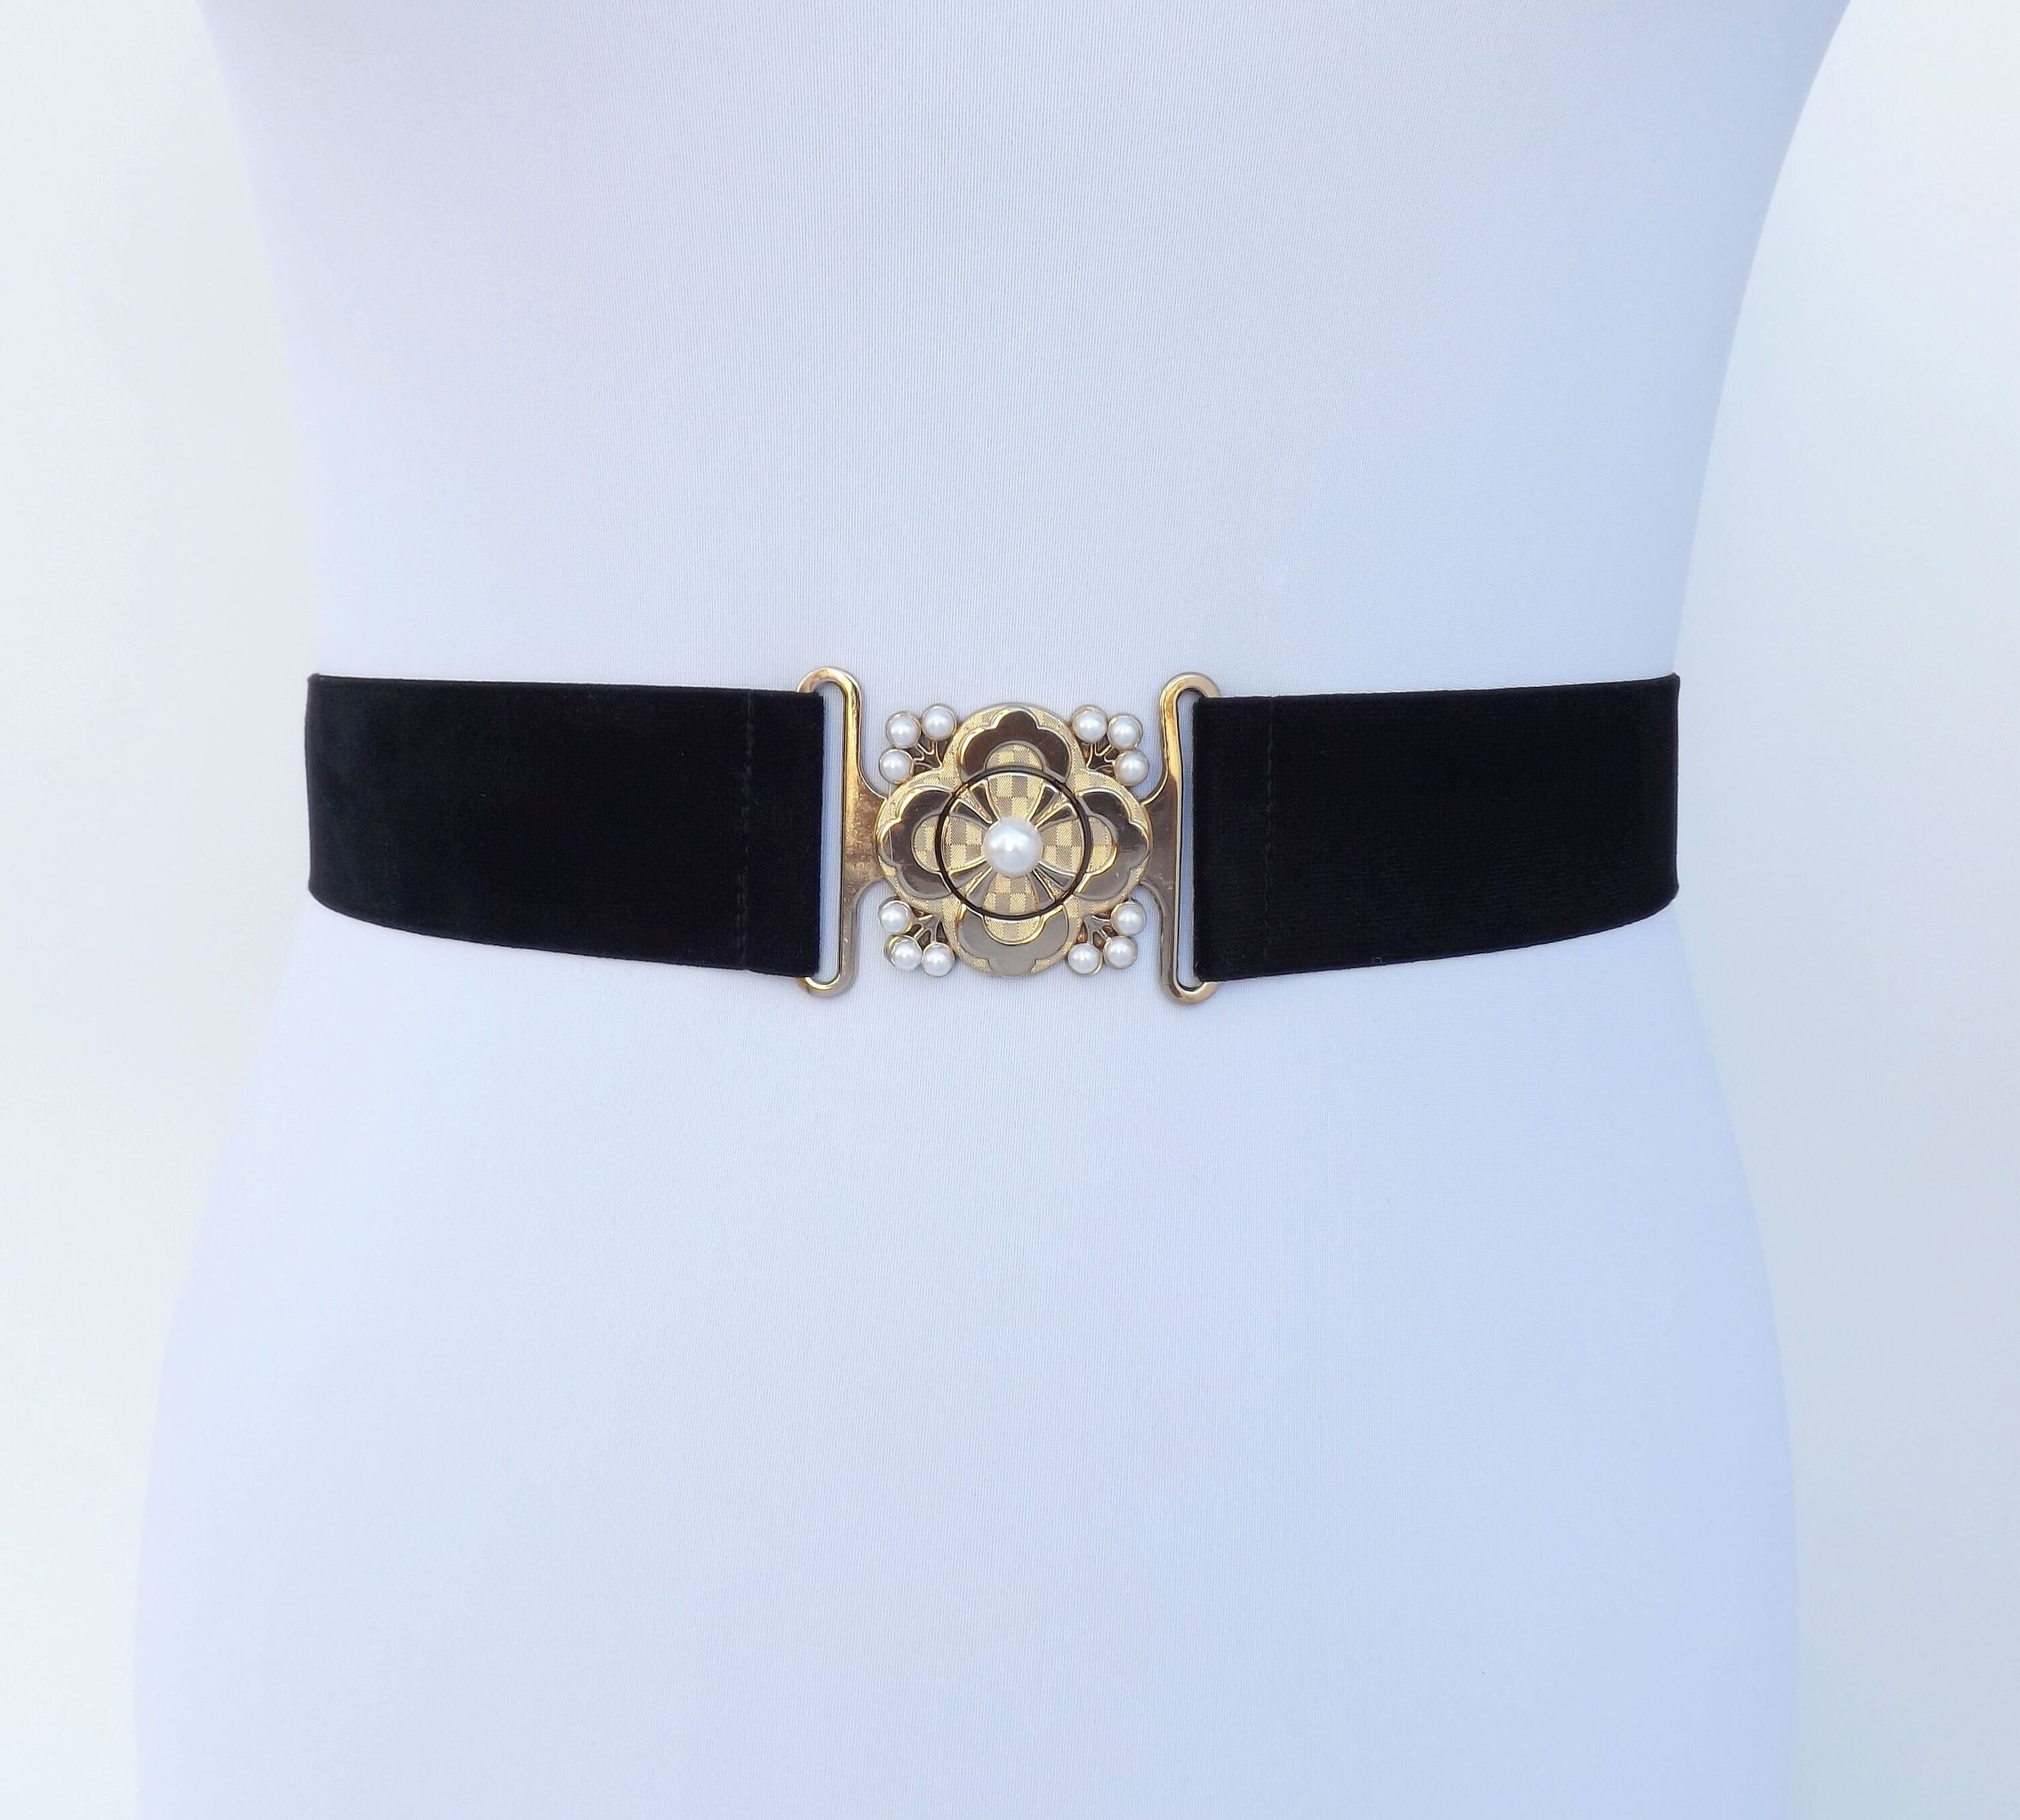 Buy Black Velvet Elastic Waist Belt With Gold Floral Pearly Clasp Online in  India 